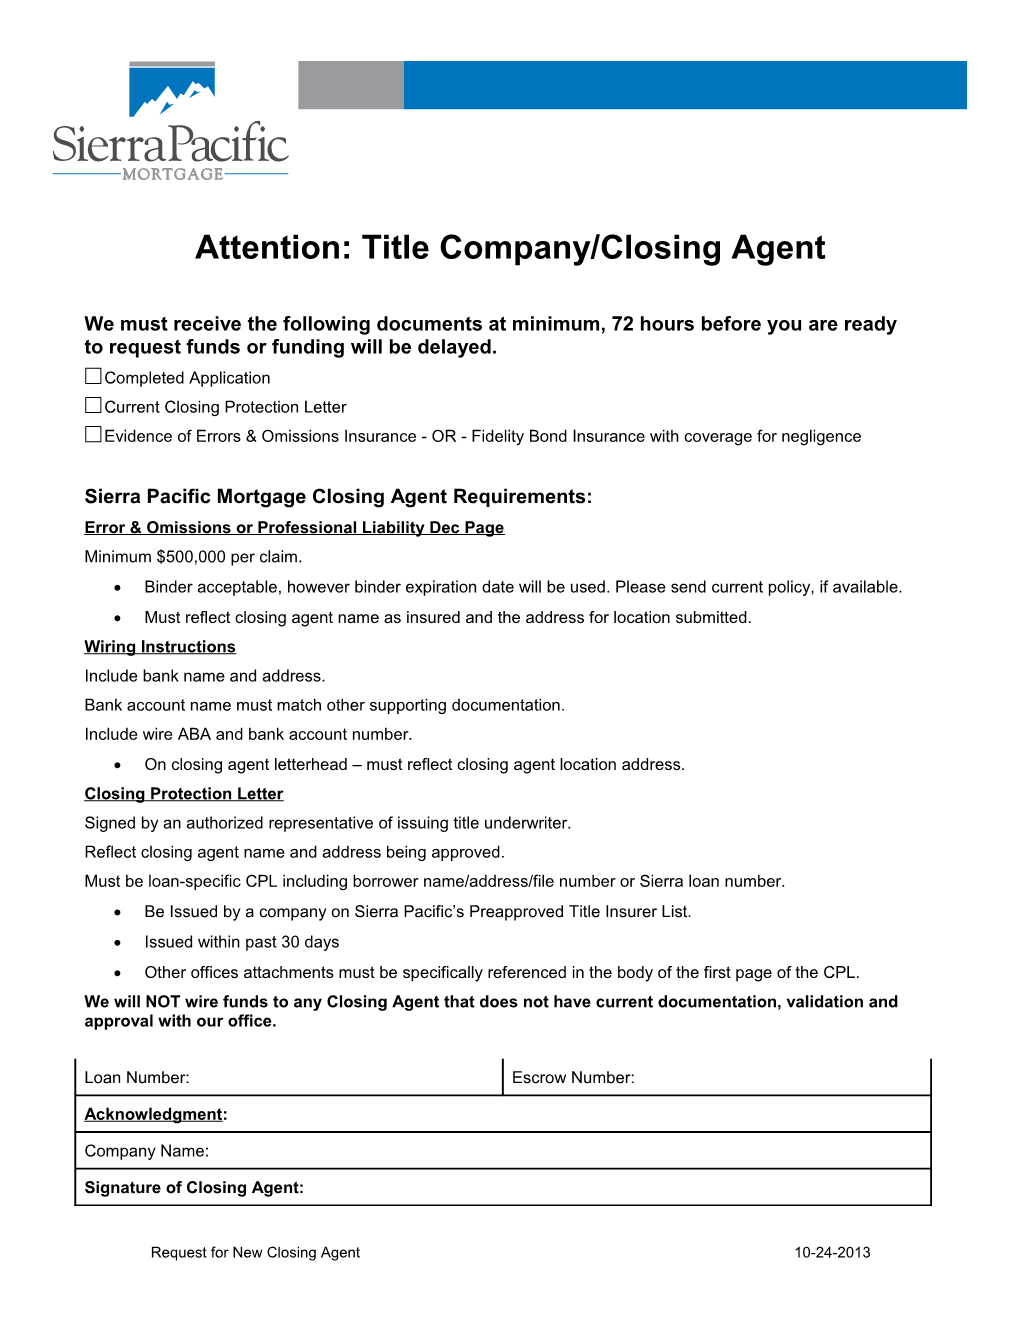 Attention Title Company / Closing Agent